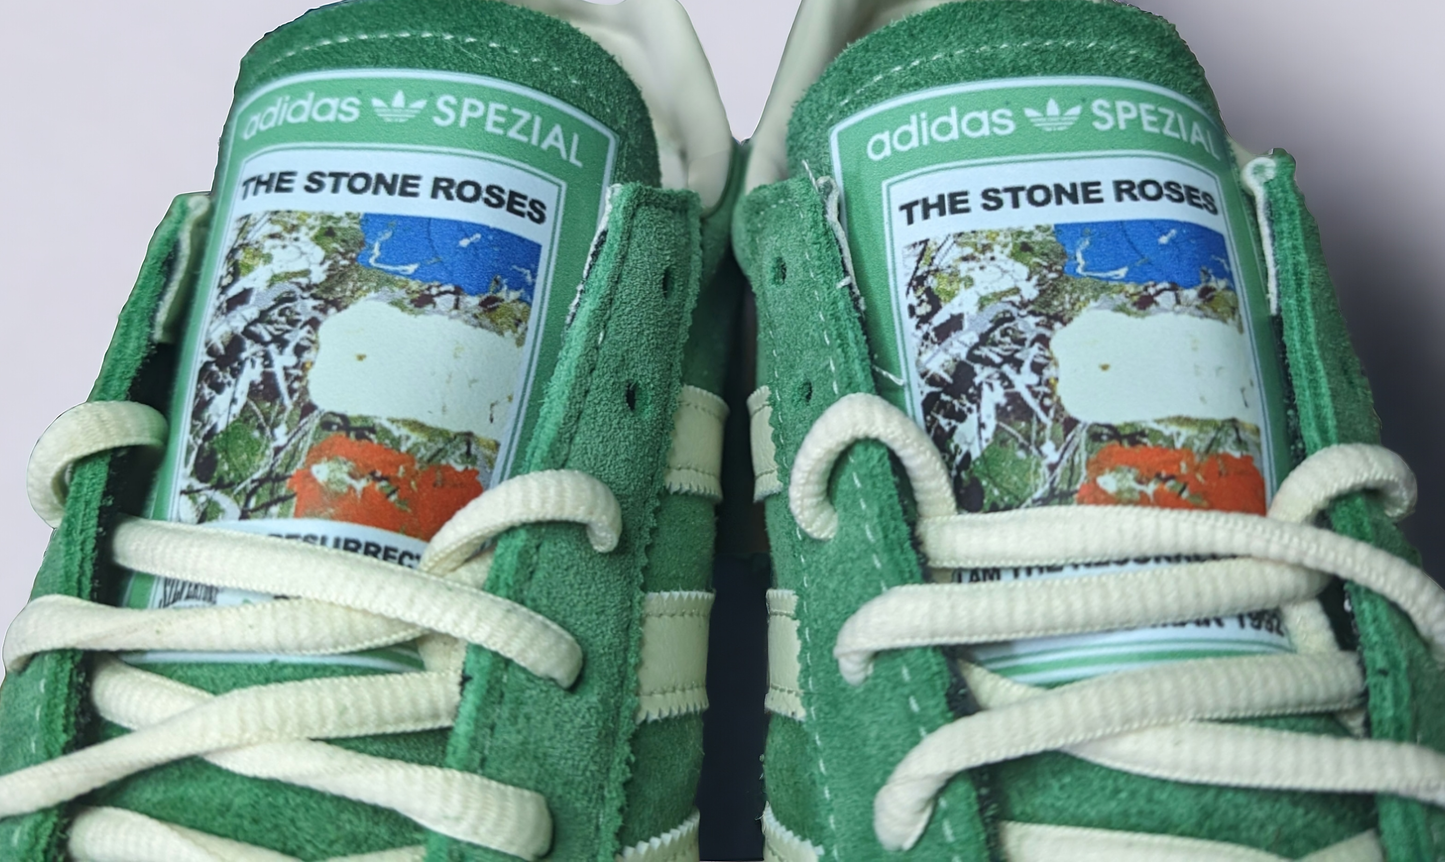 Limited edition The Stone Roses I am the resurrection adidas original Green / white Handball Spezial custom trainers / sneakers